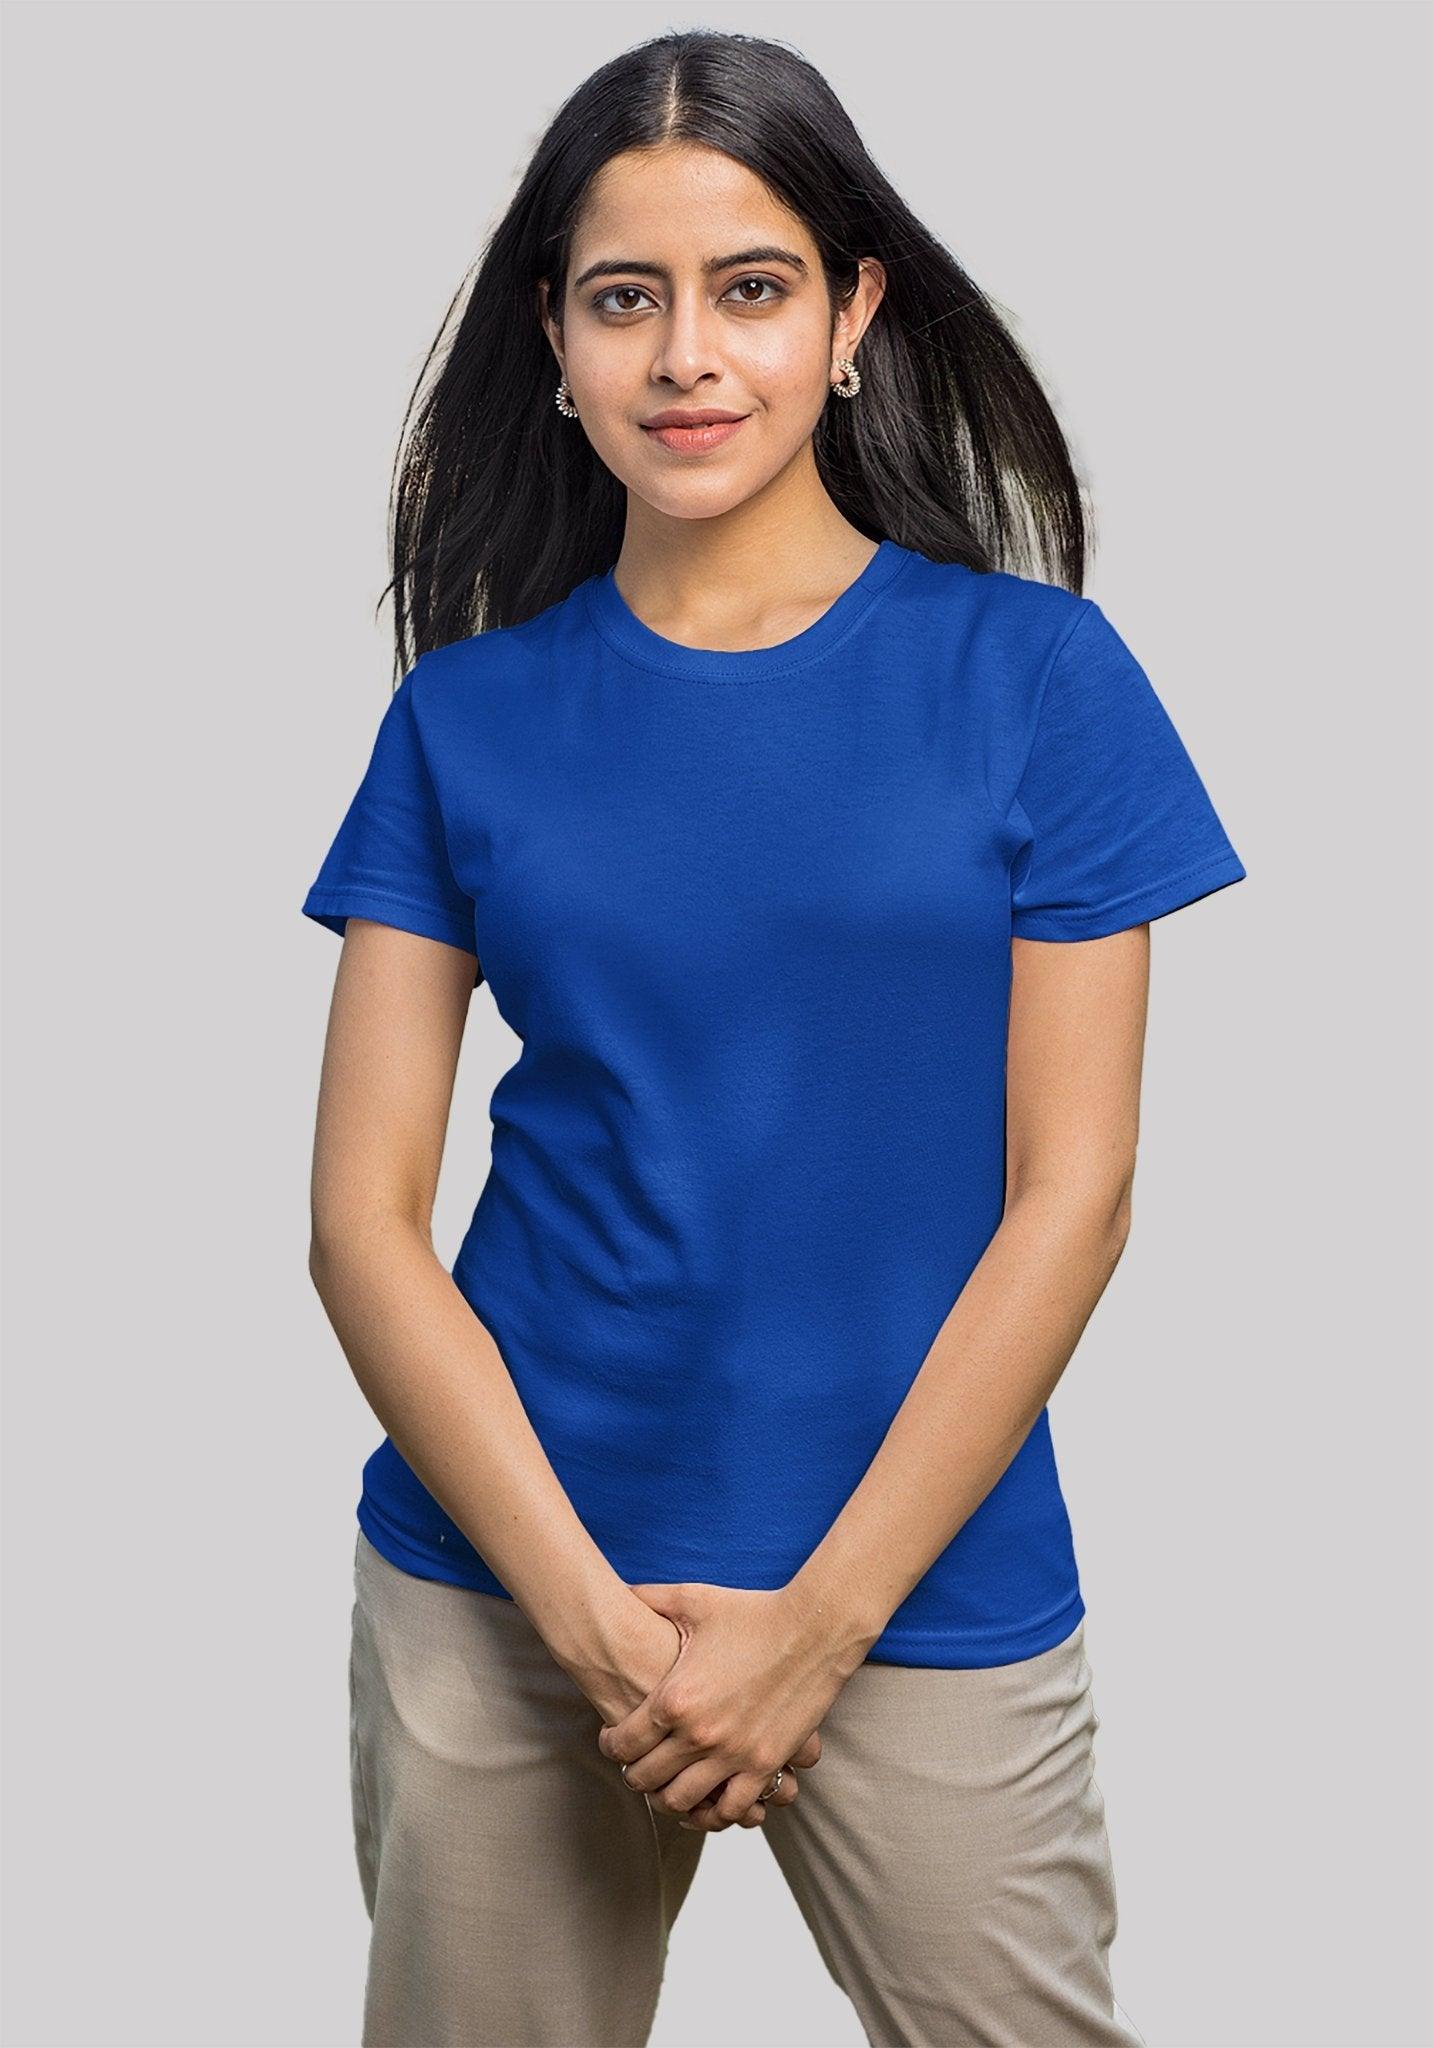 Solid Plain T Shirt For Women In Navy Blue Colour